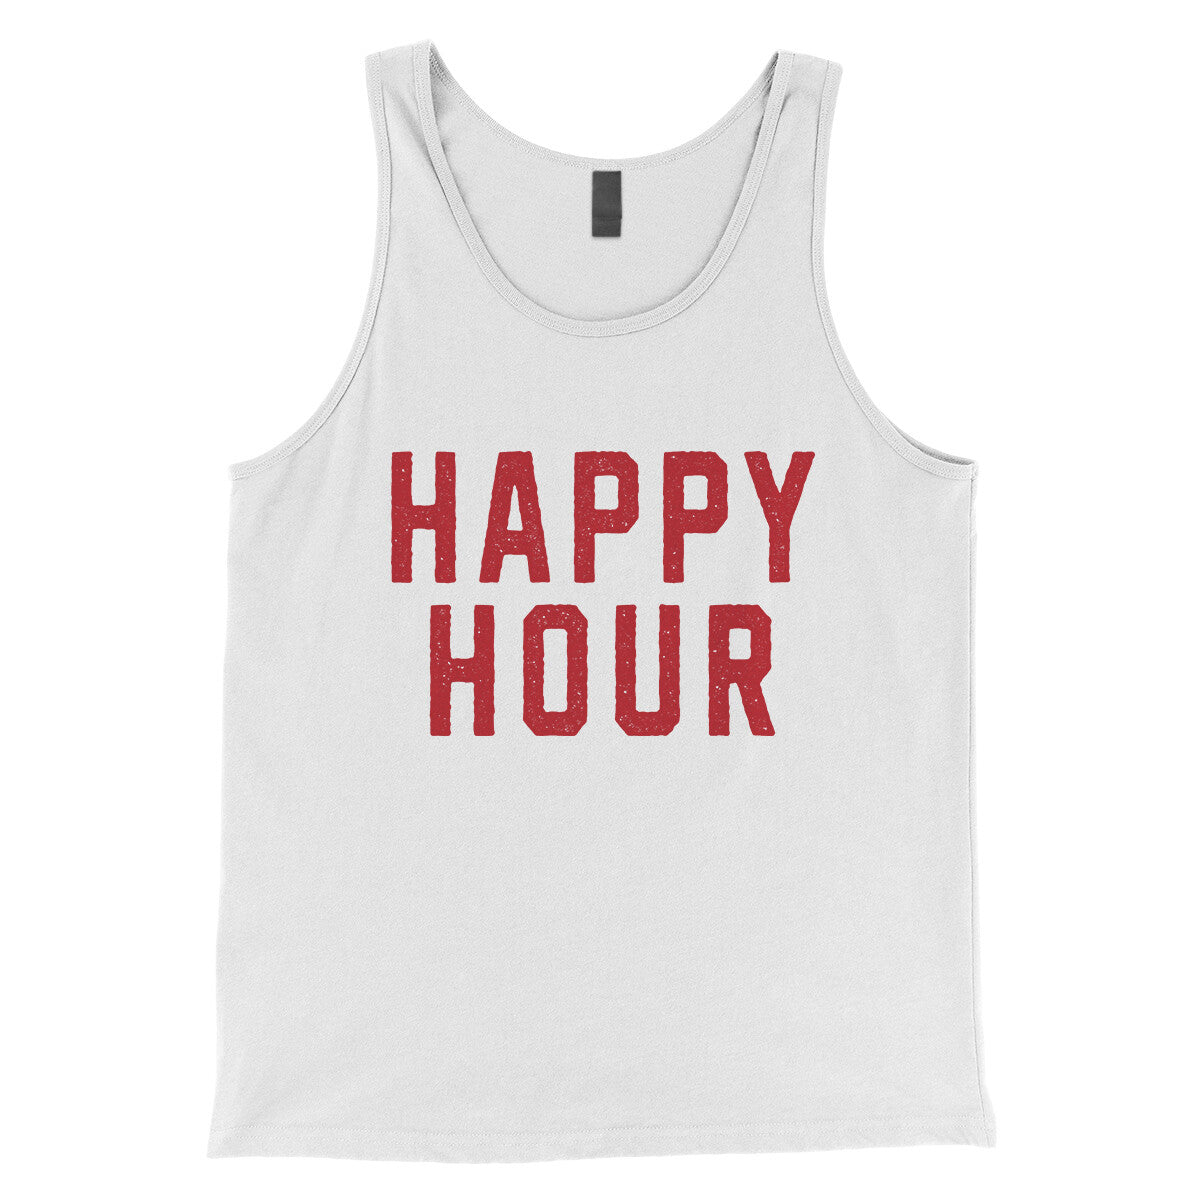 Happy Hour in White Color